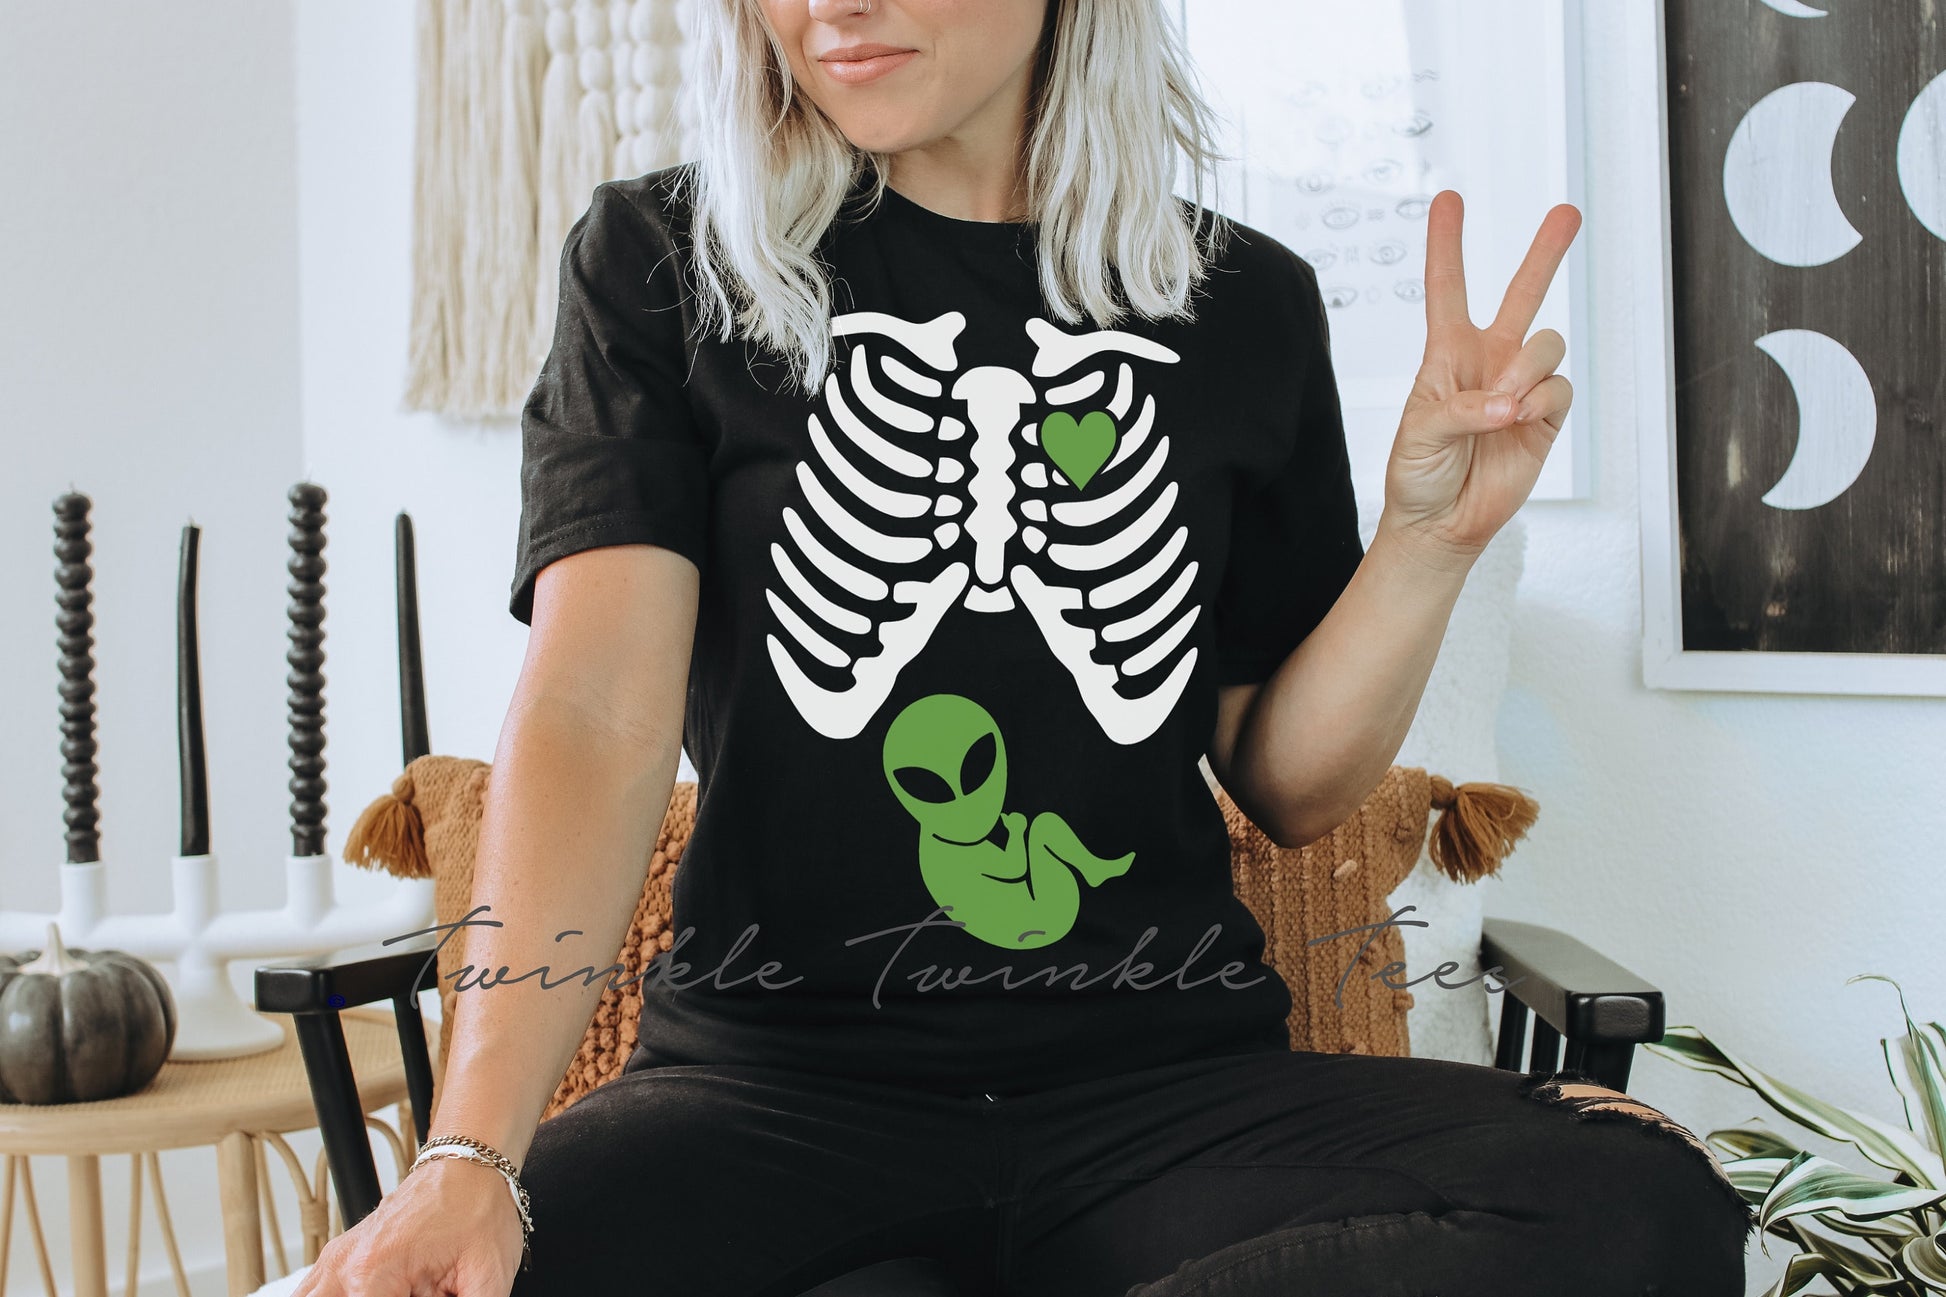 Alien Skeleton Maternity long sleeve or short sleeve t-shirt - nerdy pregnancy shirt - nerdy pregnancy announcement - dad options too